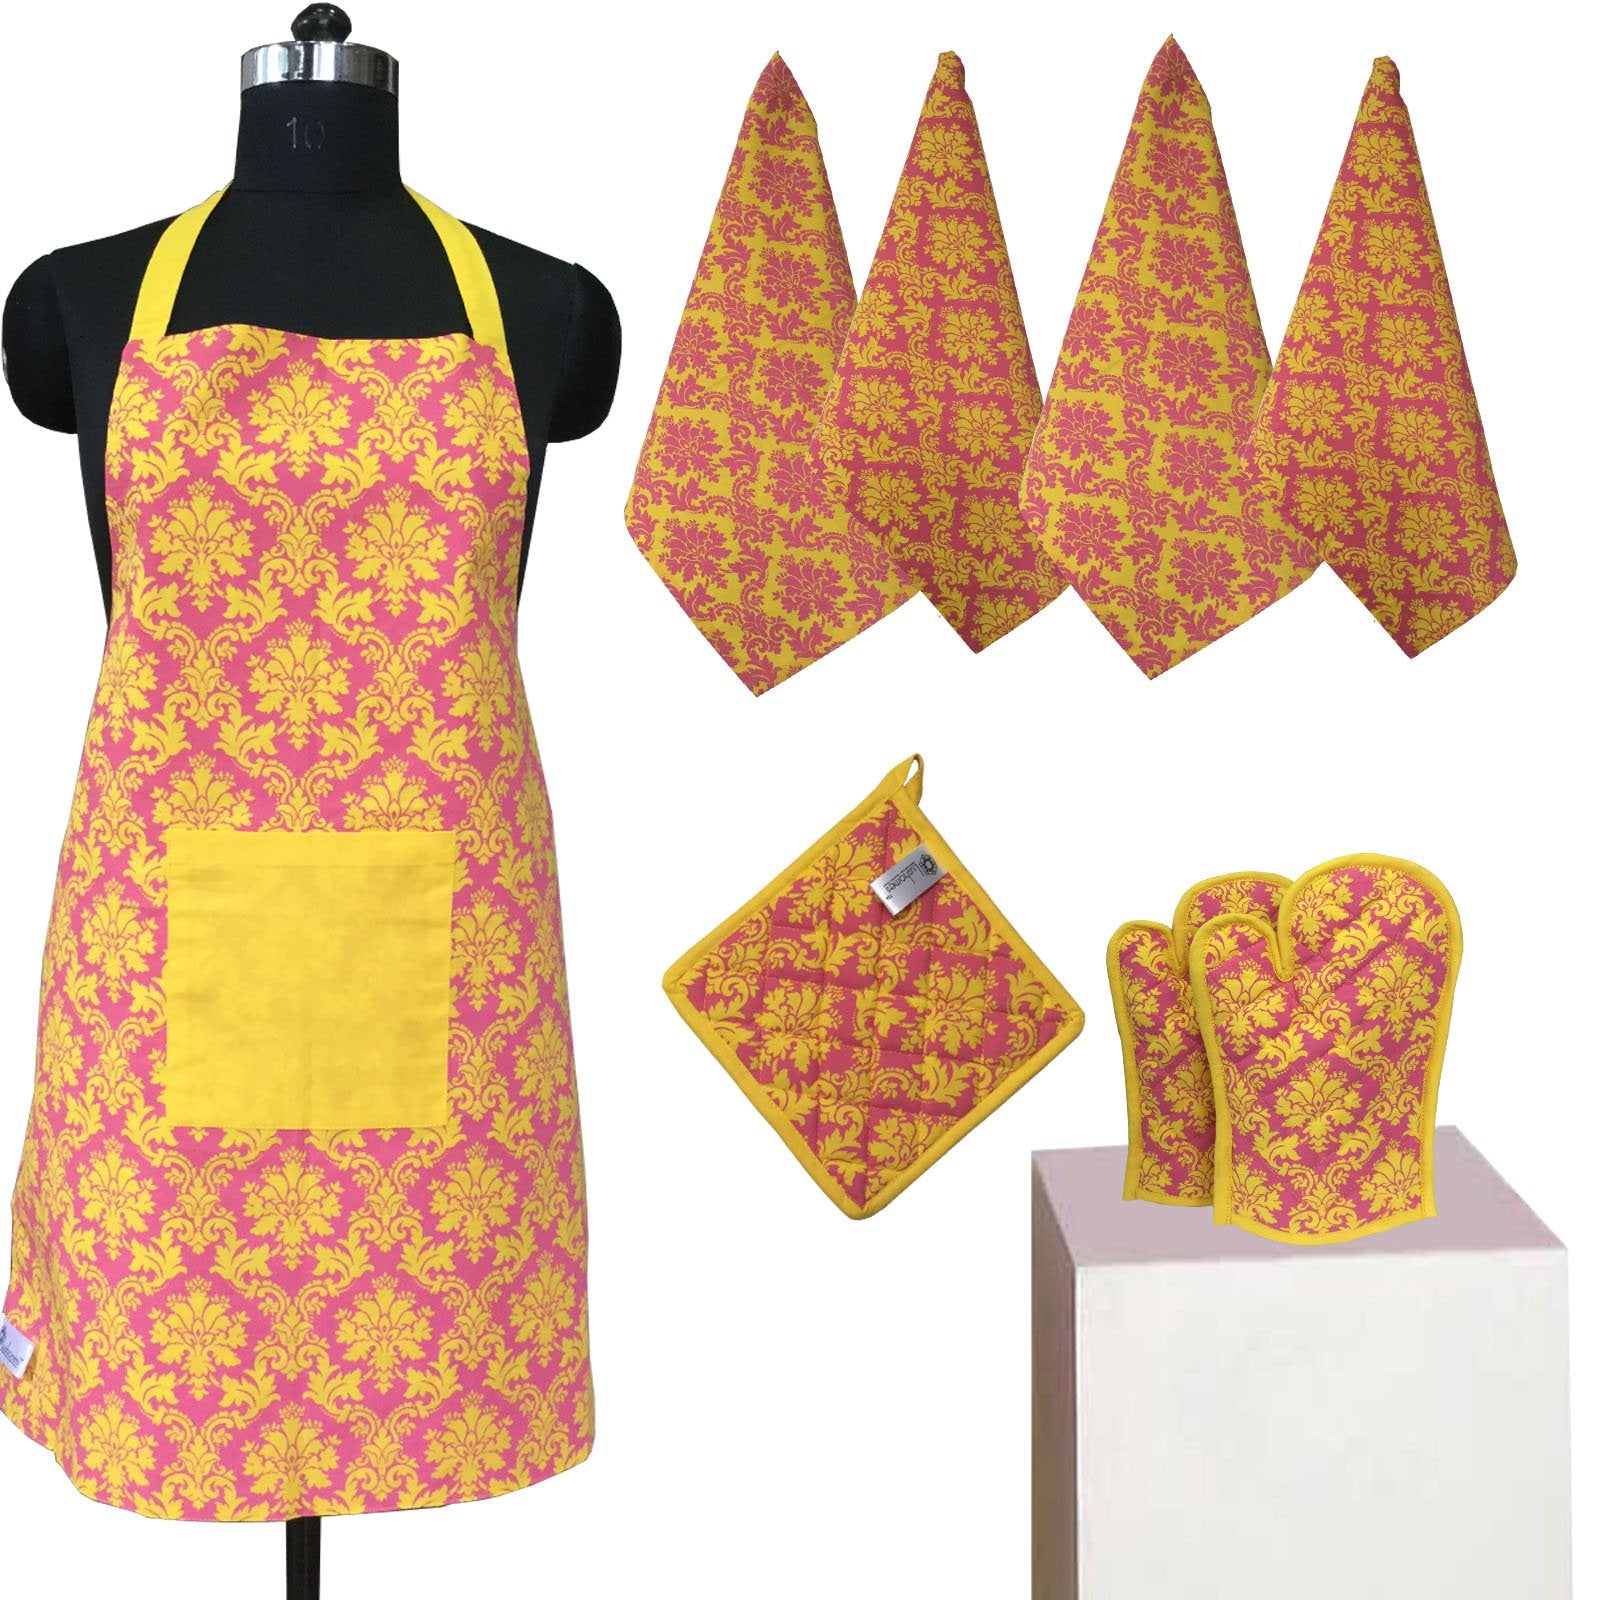 Lushomes Colorful Printed 2 in 1 Stylish Reversible Apron Set ( 1 Apron, 4 Kitchen towels, 2 Oven Mittens, 1 Pot Holder)